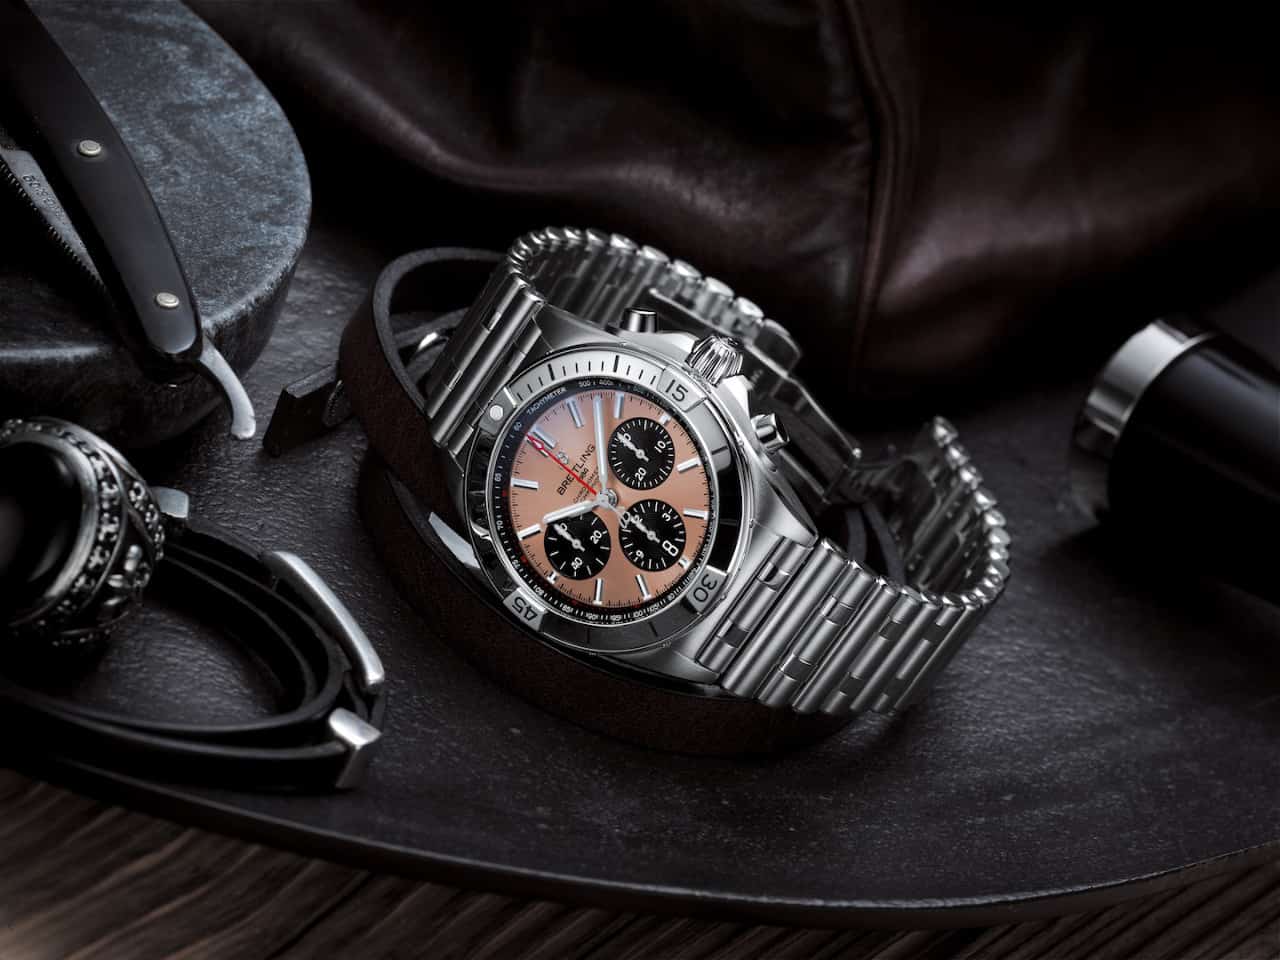 Chronomat B01 42 with a copper colored dial and black contrasting chronograph counters